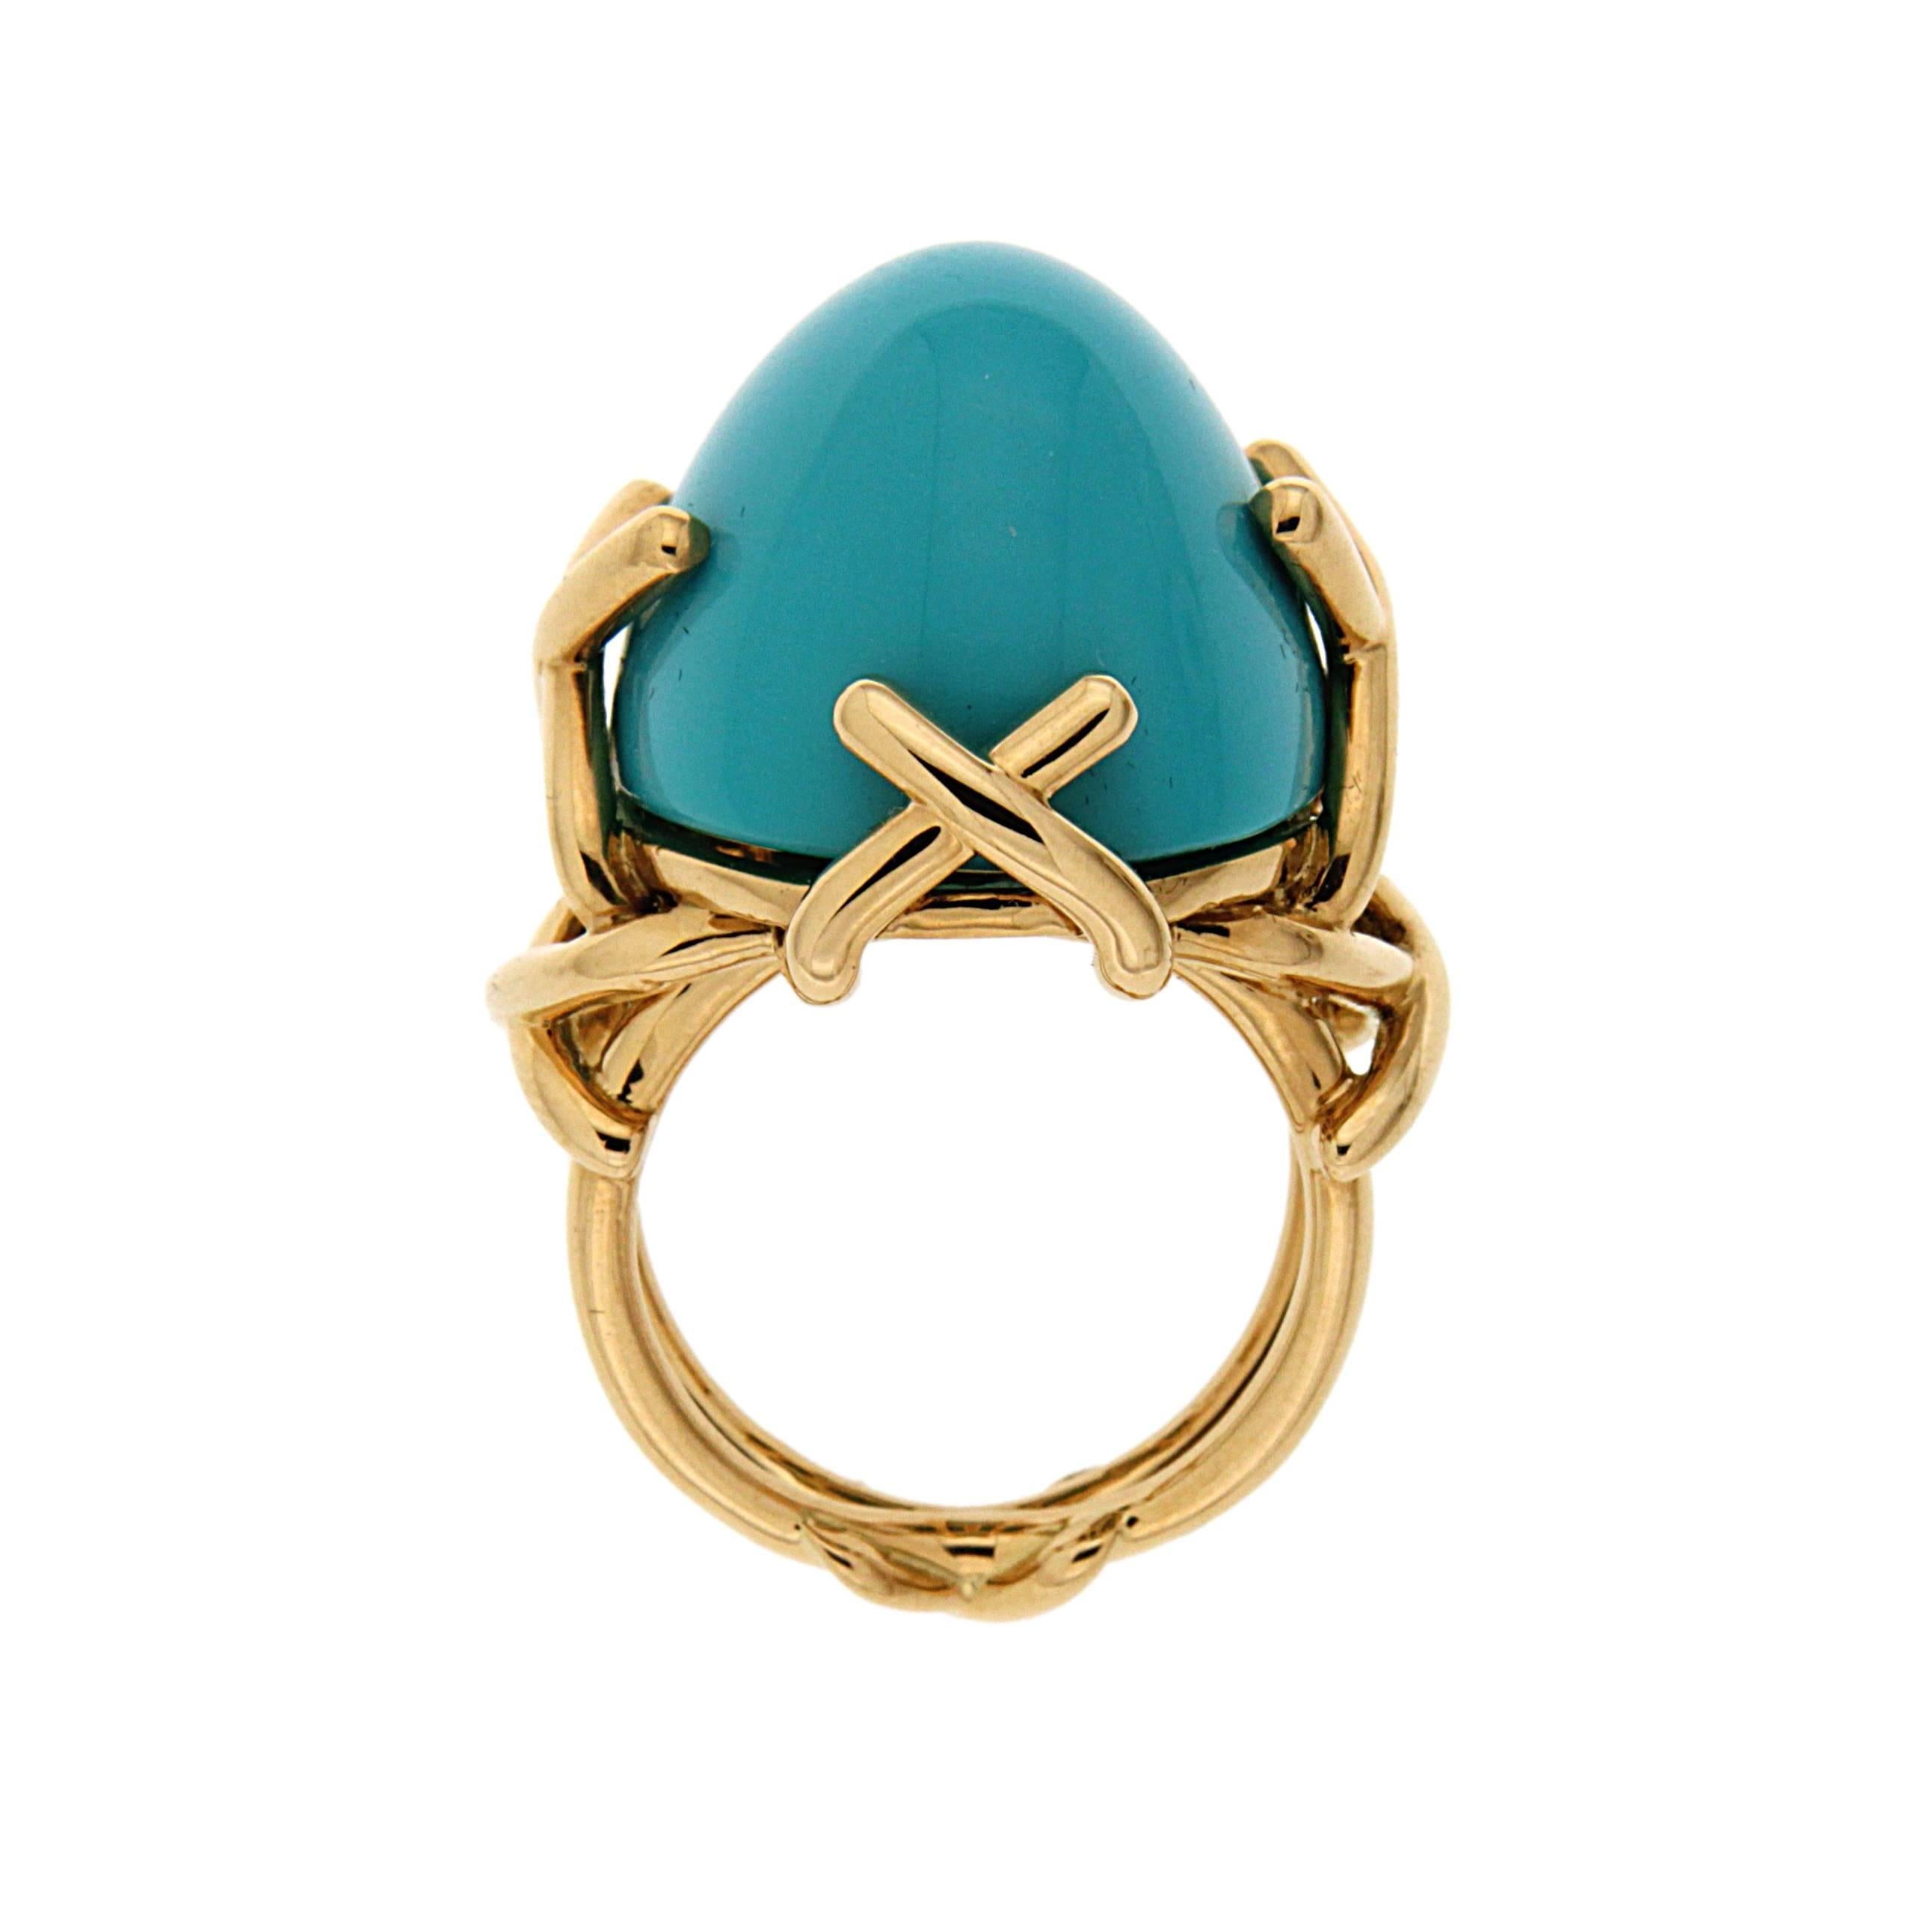 This ring is made in 18kt yellow gold trellis shank, it features an oval cabochon turquoise stone which measures 22x18mm.